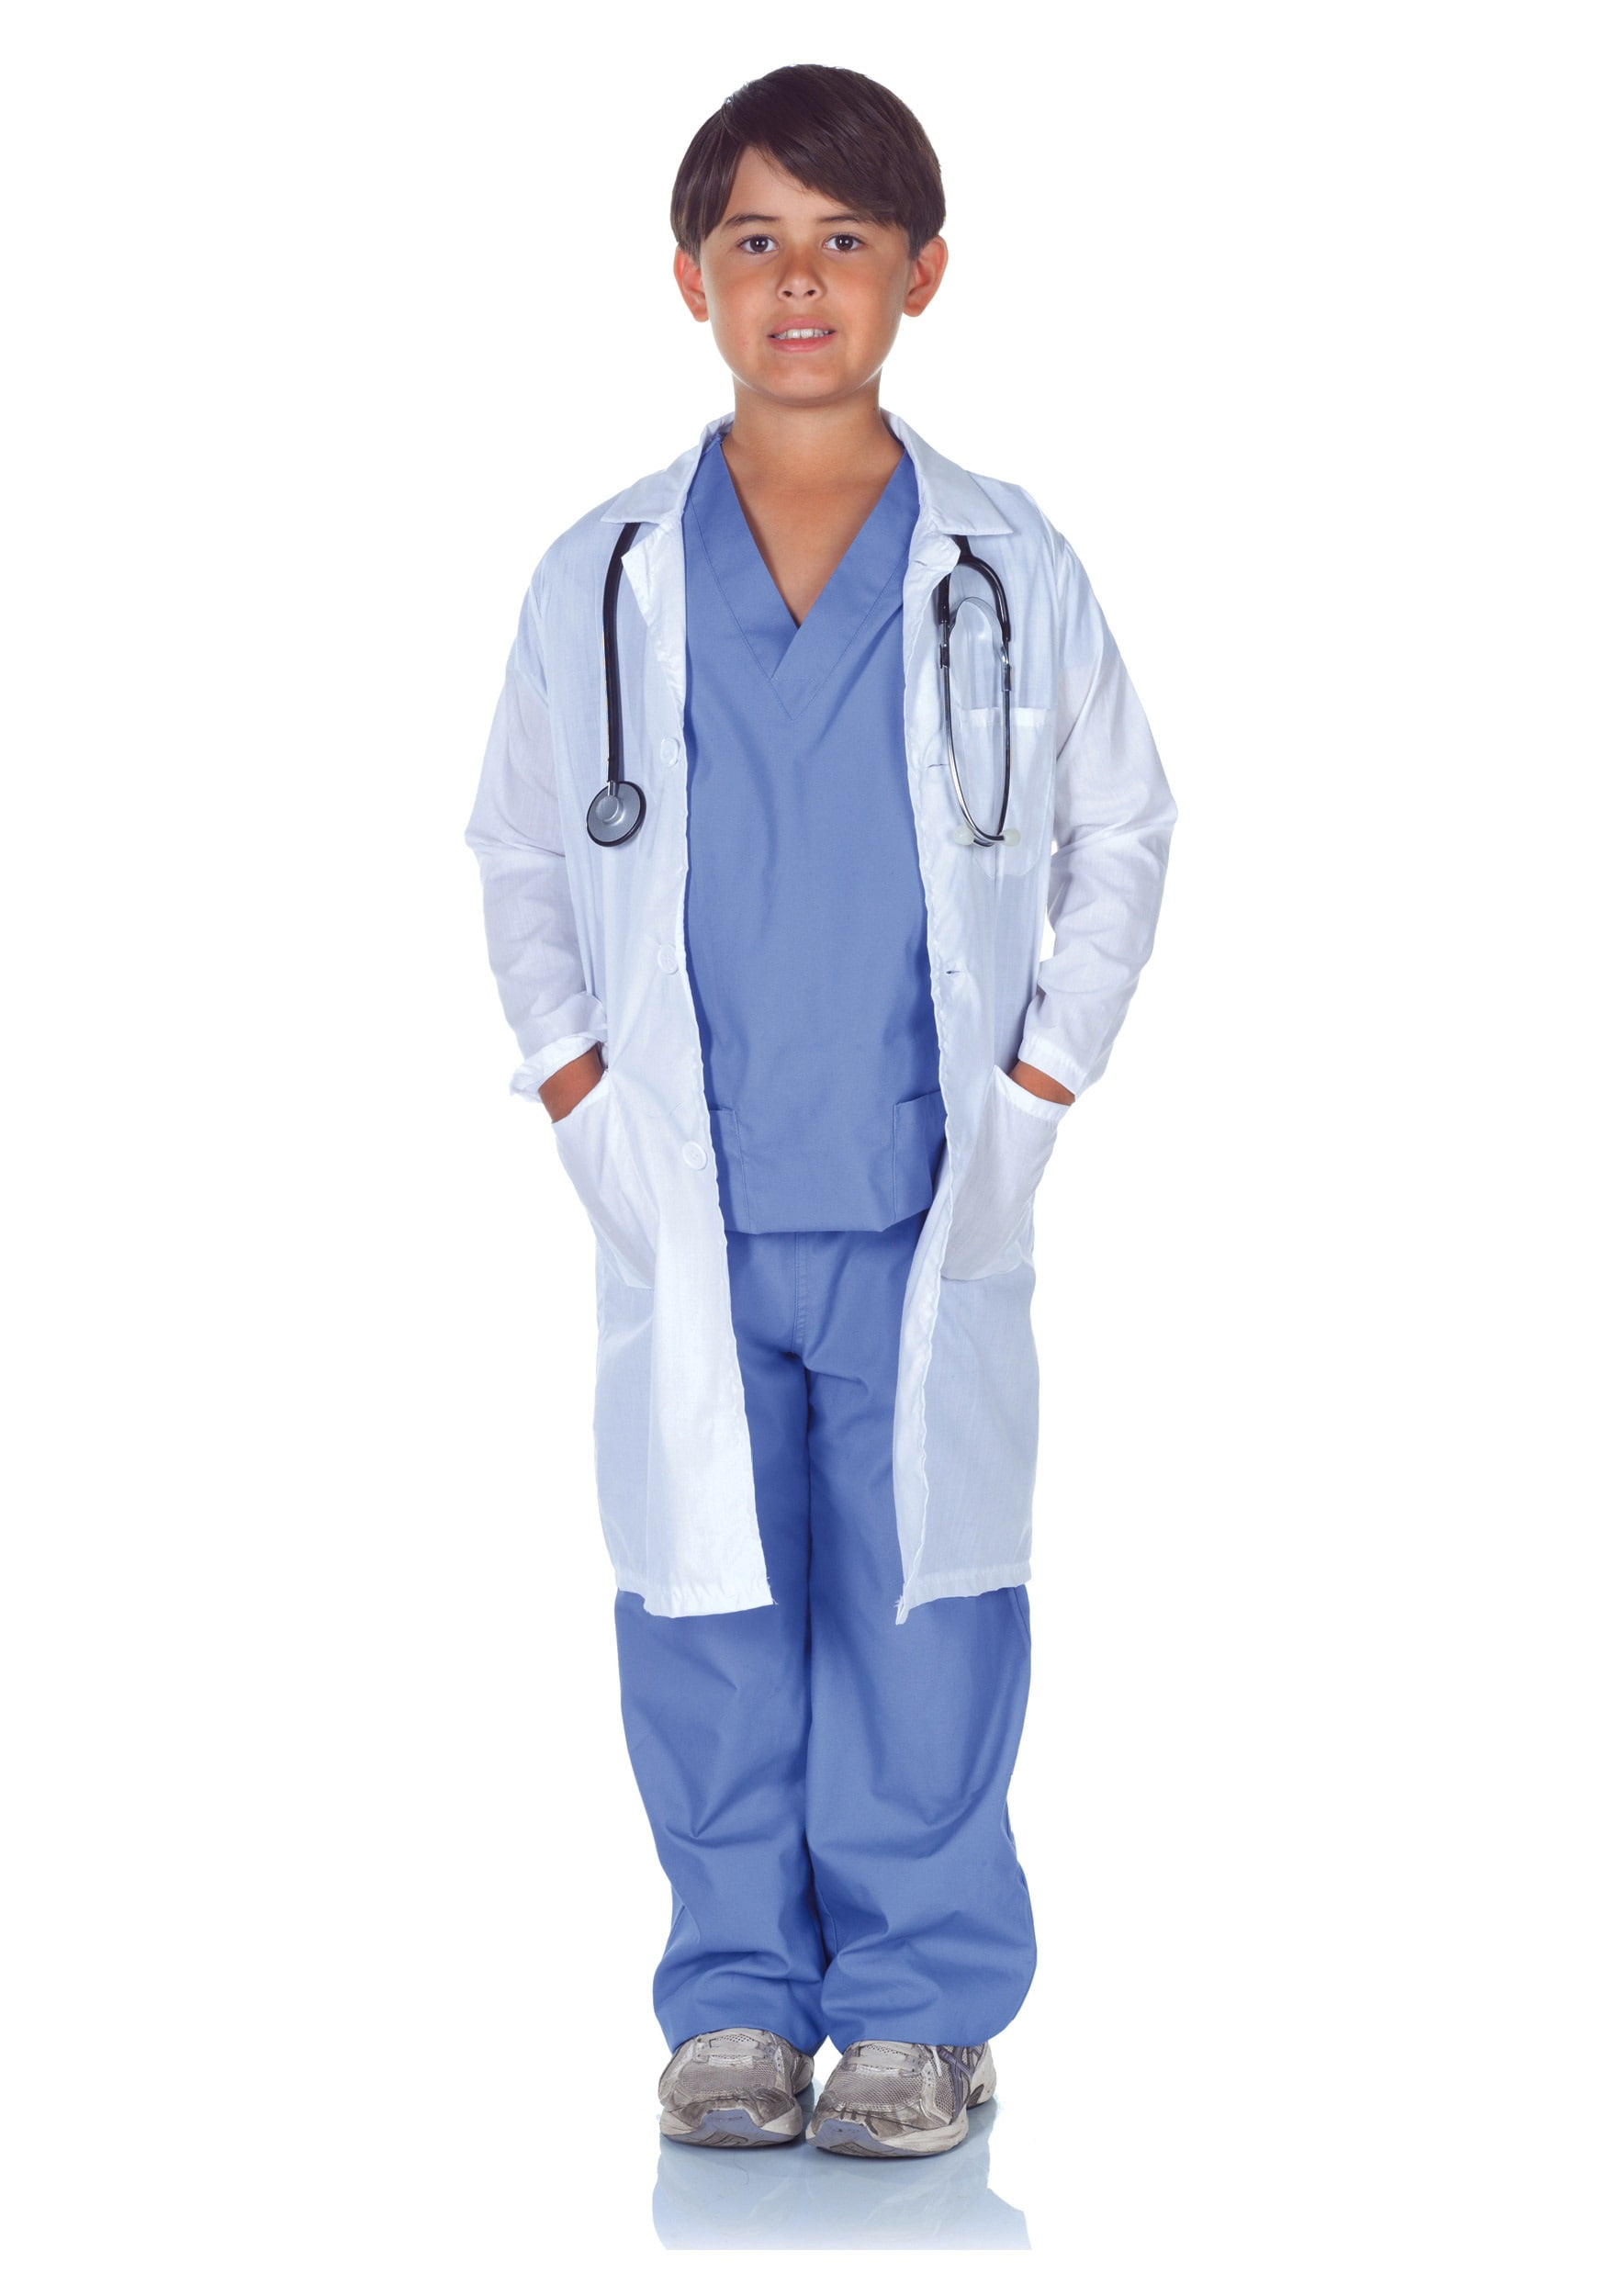 Children Kids Unisex Hospital Doctor Lab Coat Fancy Dress Party Costumes Outfit 